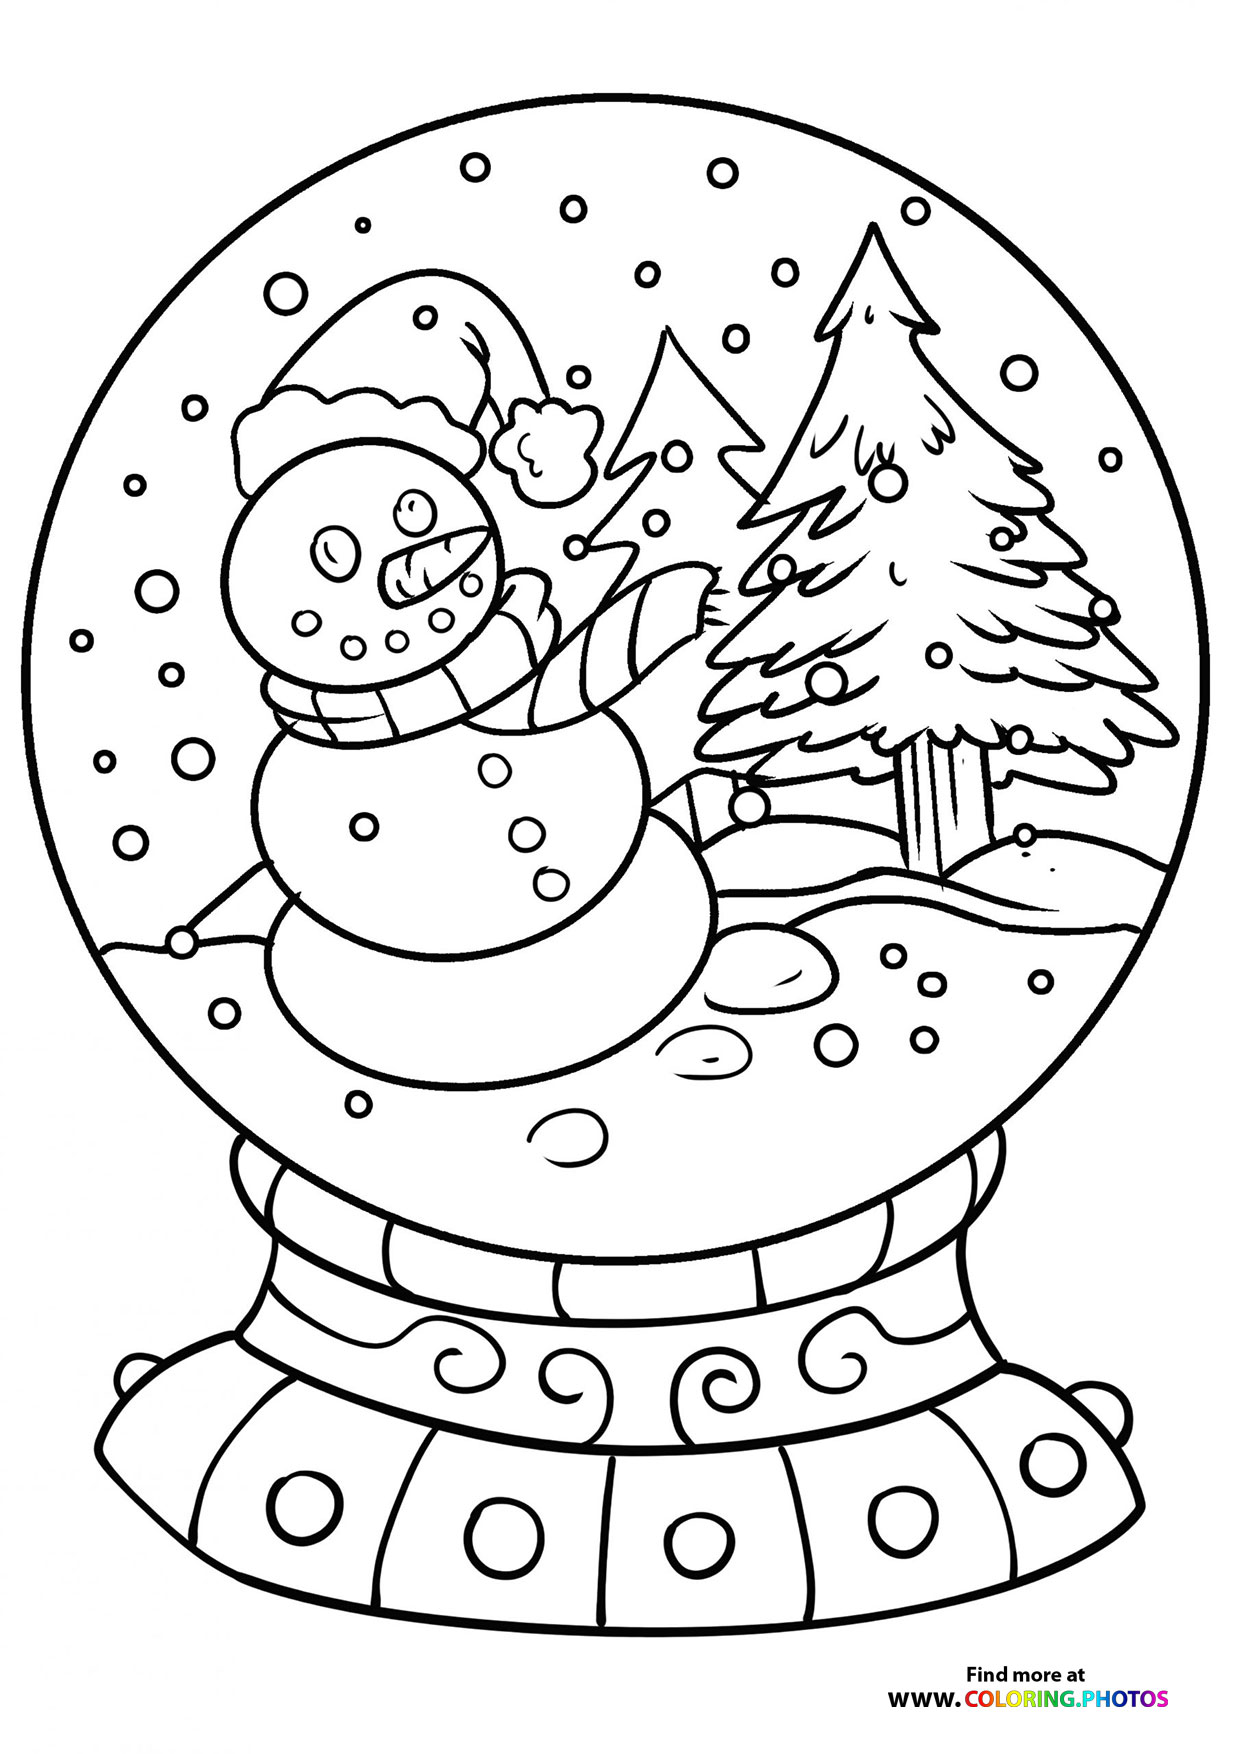 Snowman in snow globe - Coloring Pages for kids